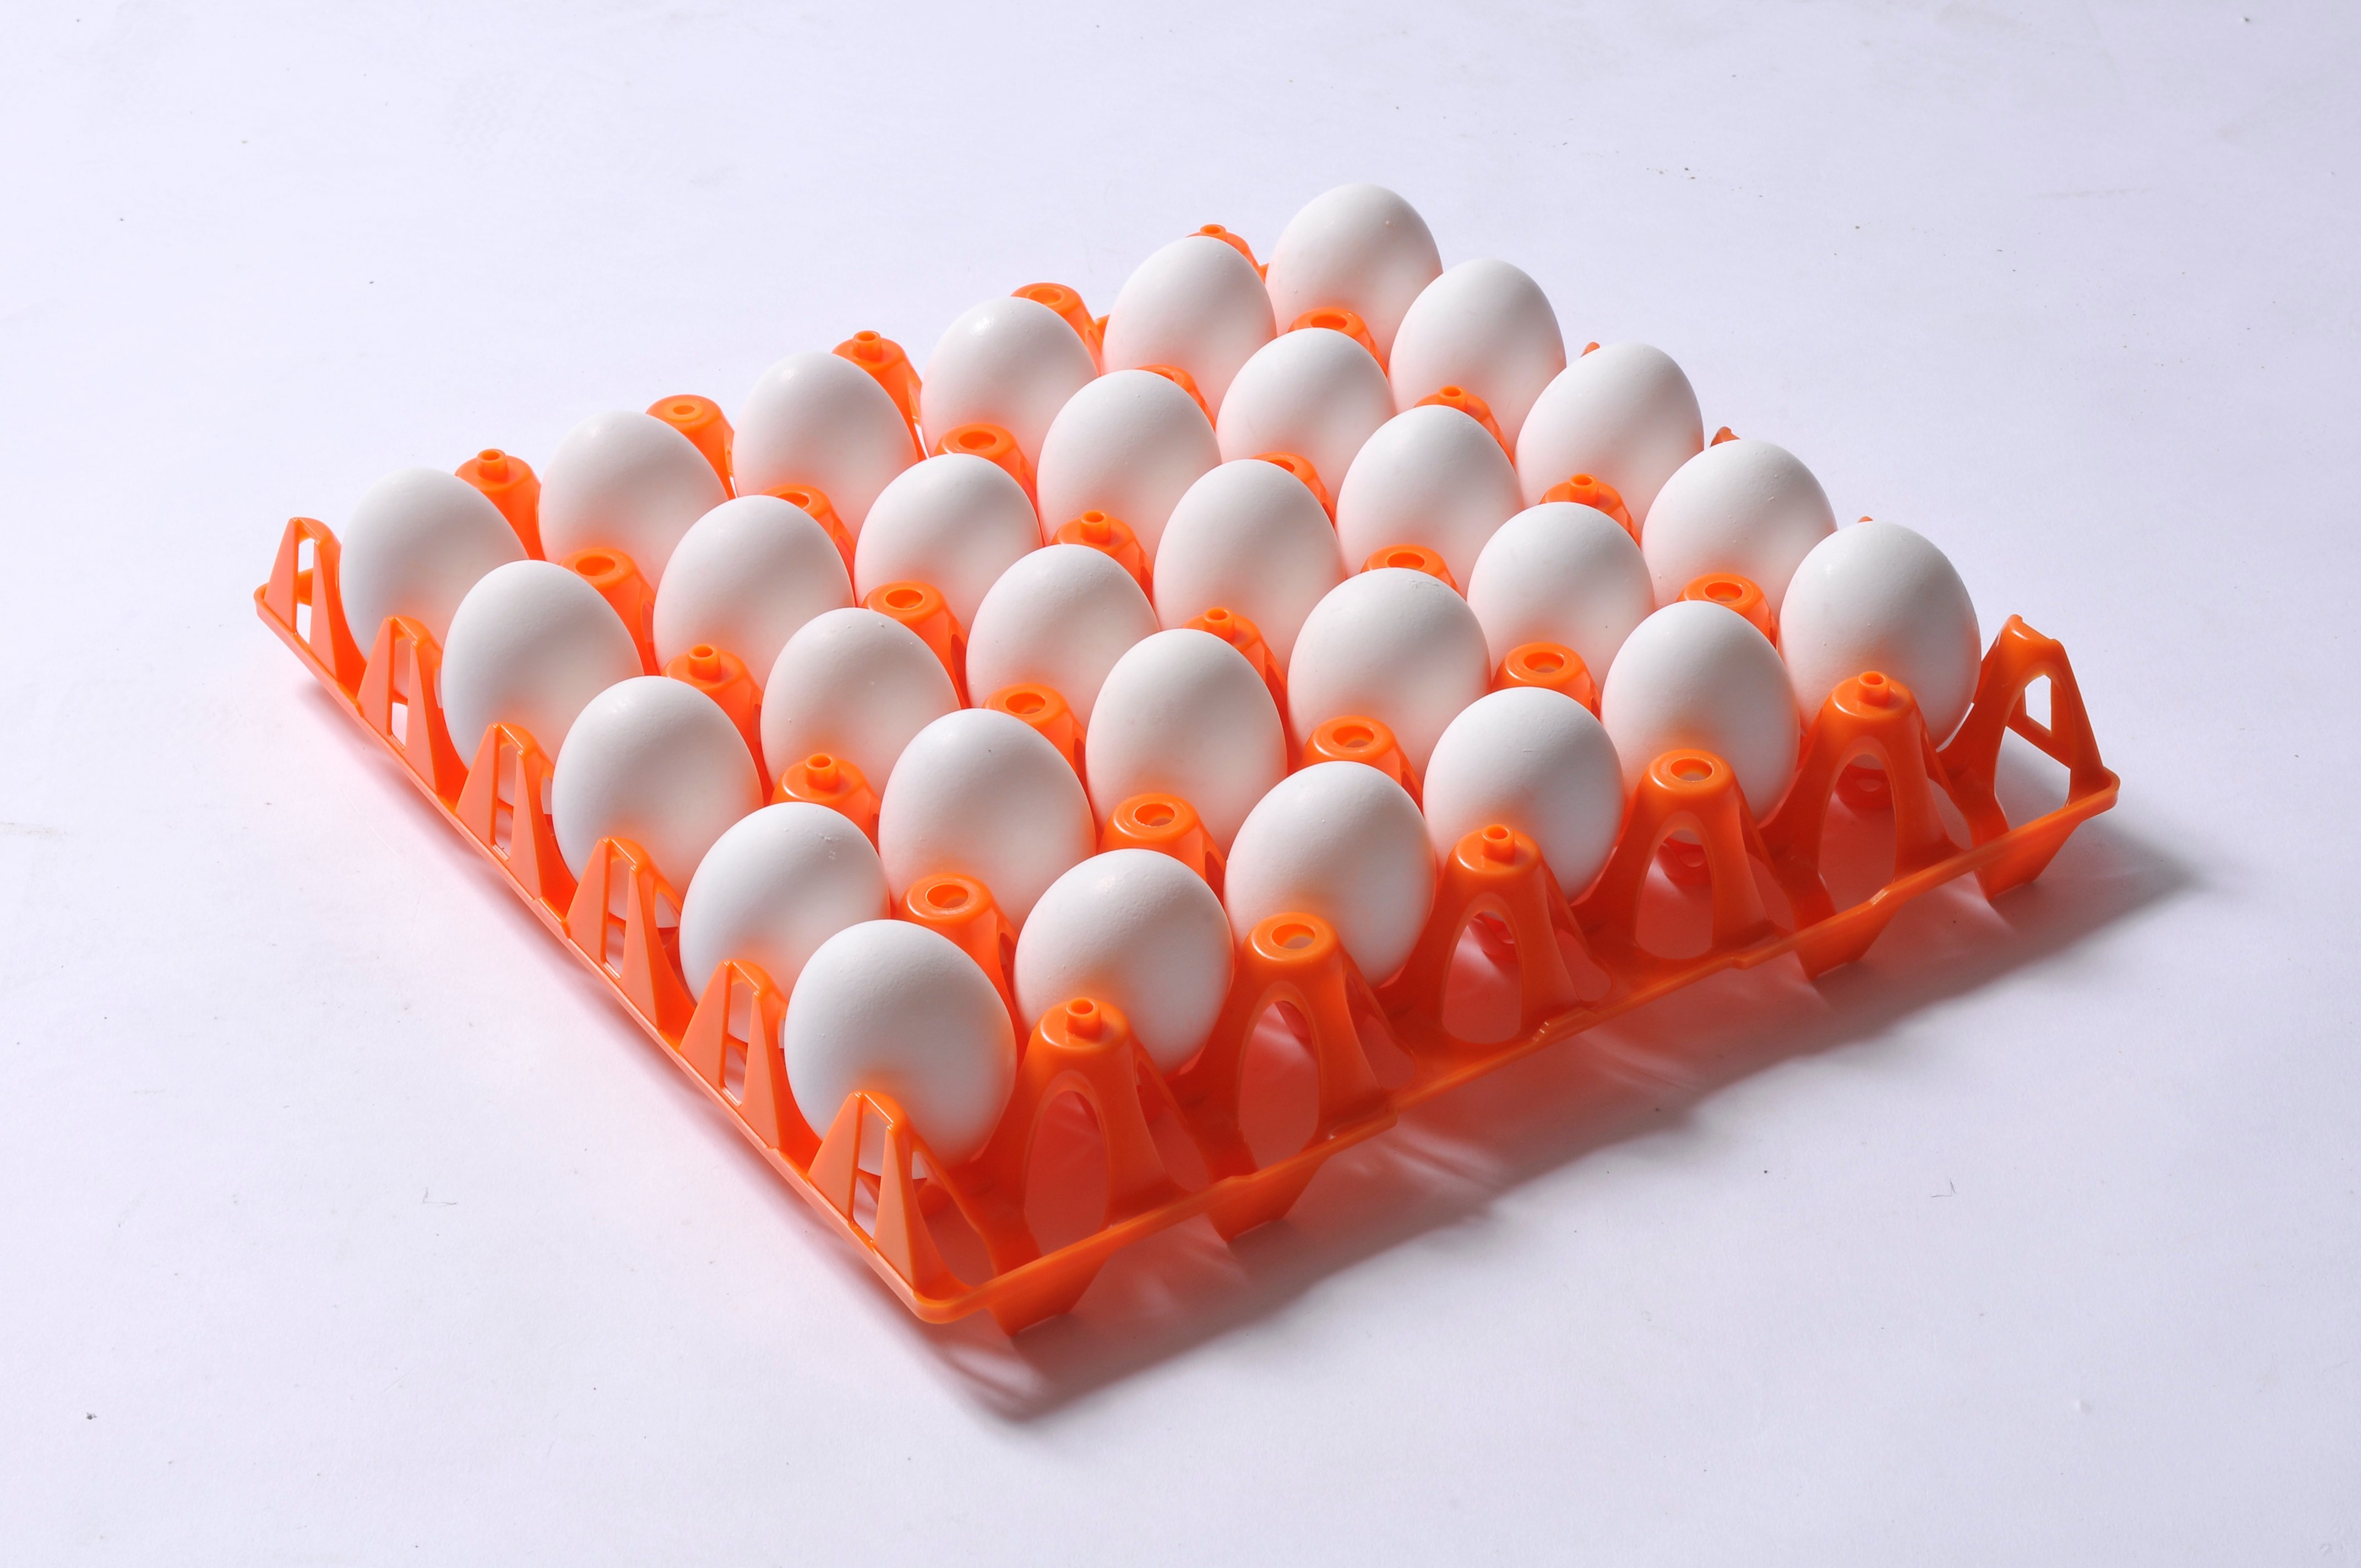 More than it’s cracked up to be: the science behind plastic egg tray design